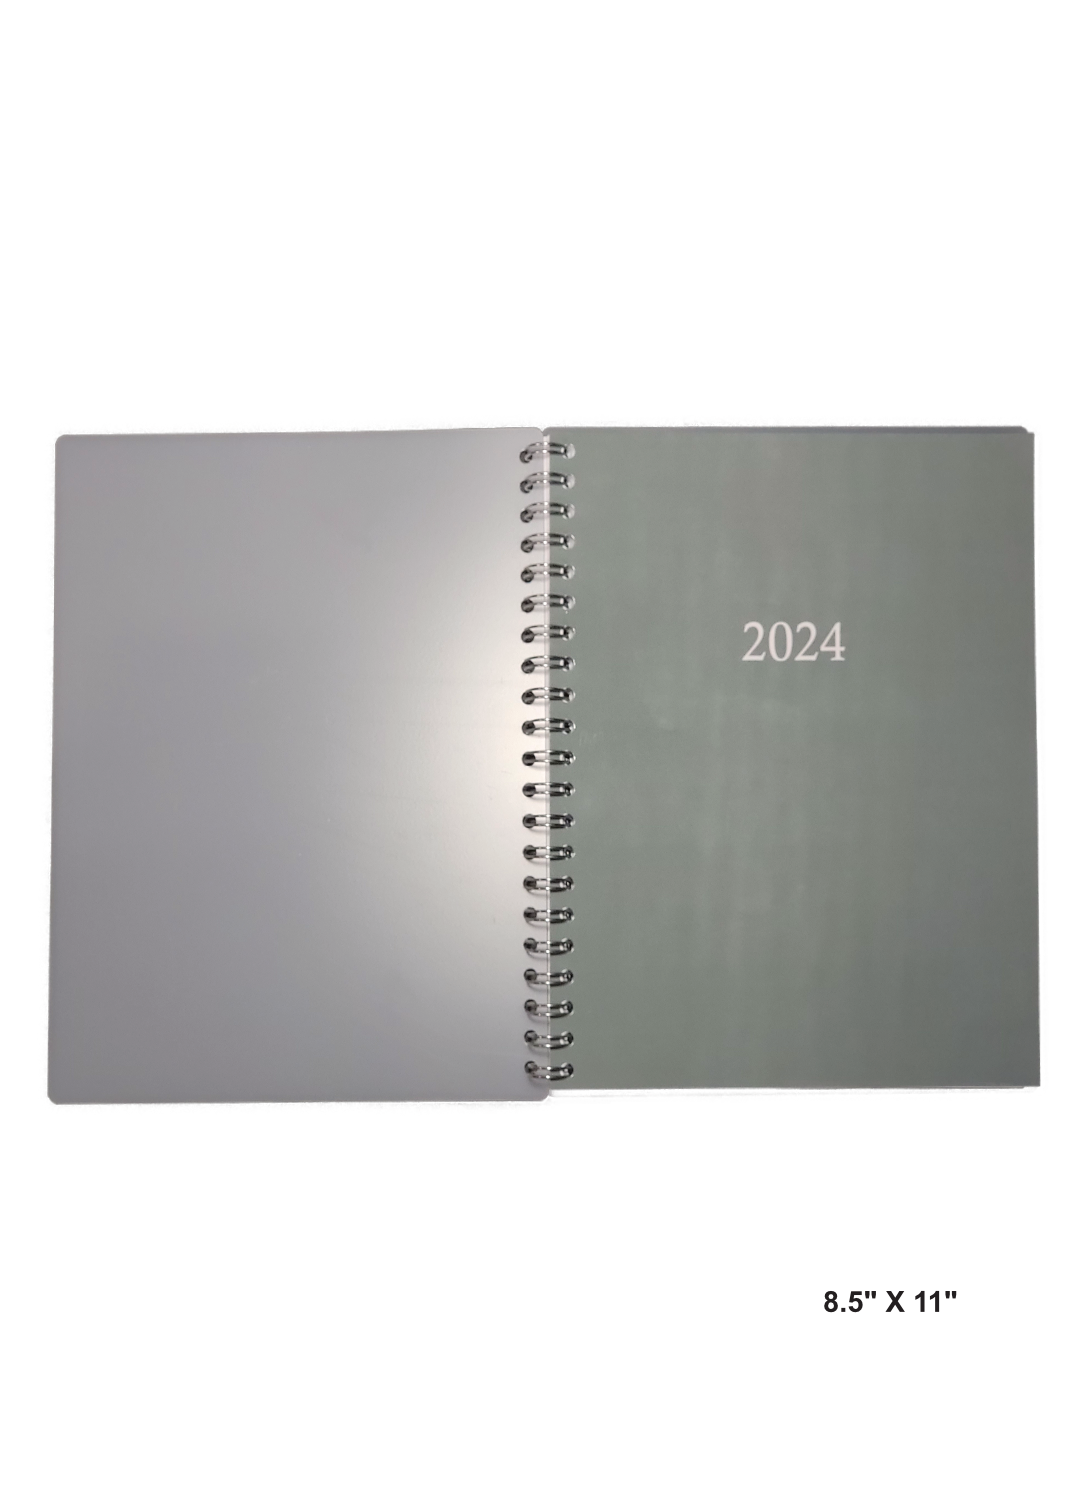 Image of a hand-made 8.5" x 11" 12 month planner with solid green cover. Great for planning and organization.